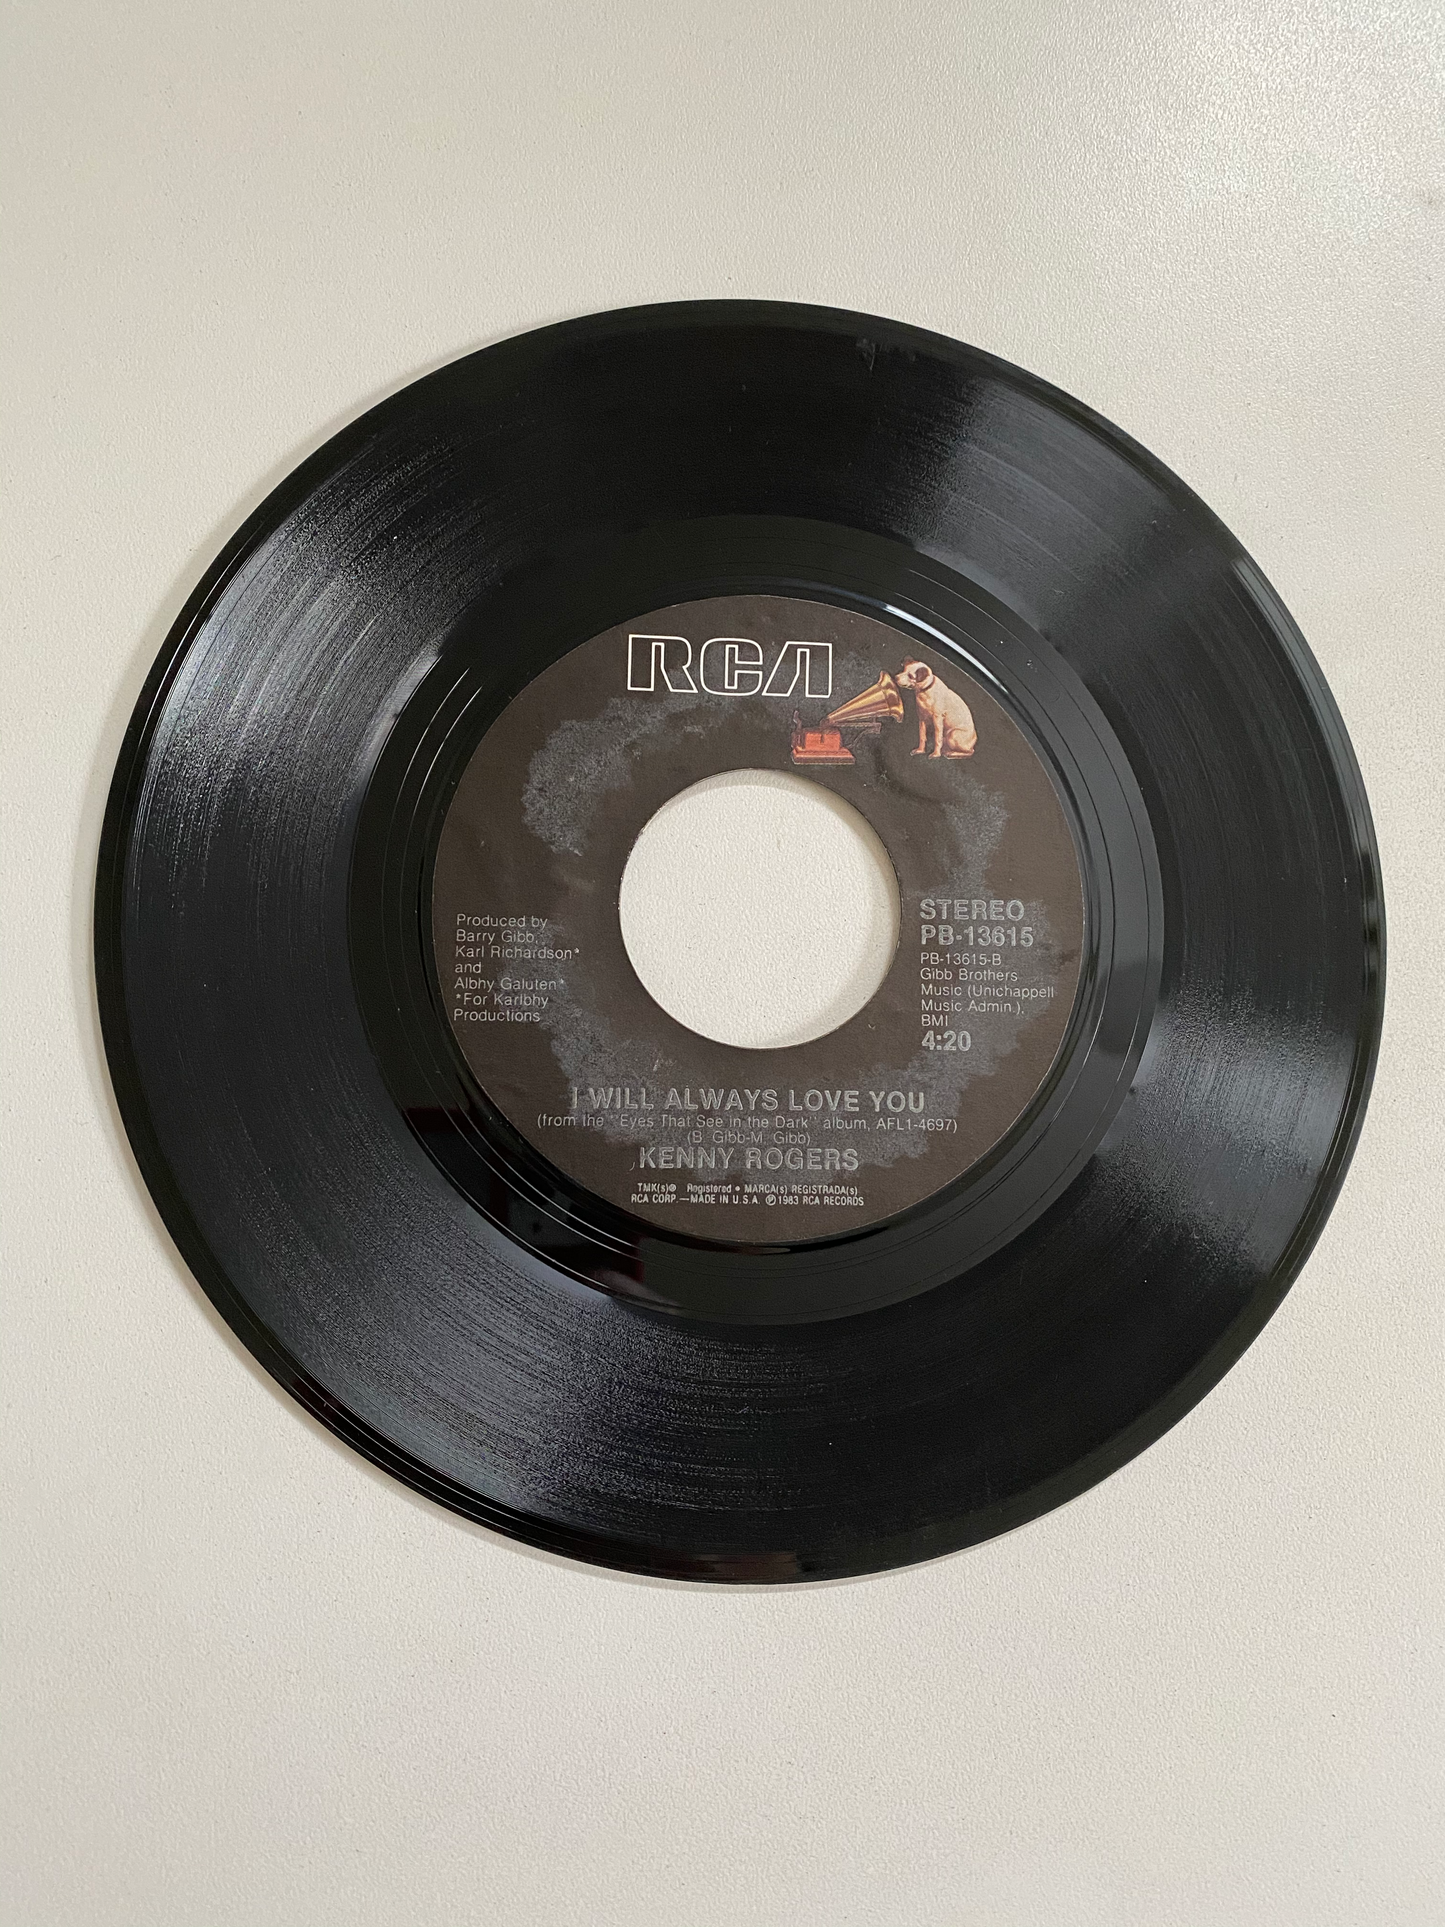 Kenny Rogers and Dolly Parton - Islands in the Stream | 45 The Vintedge Co.